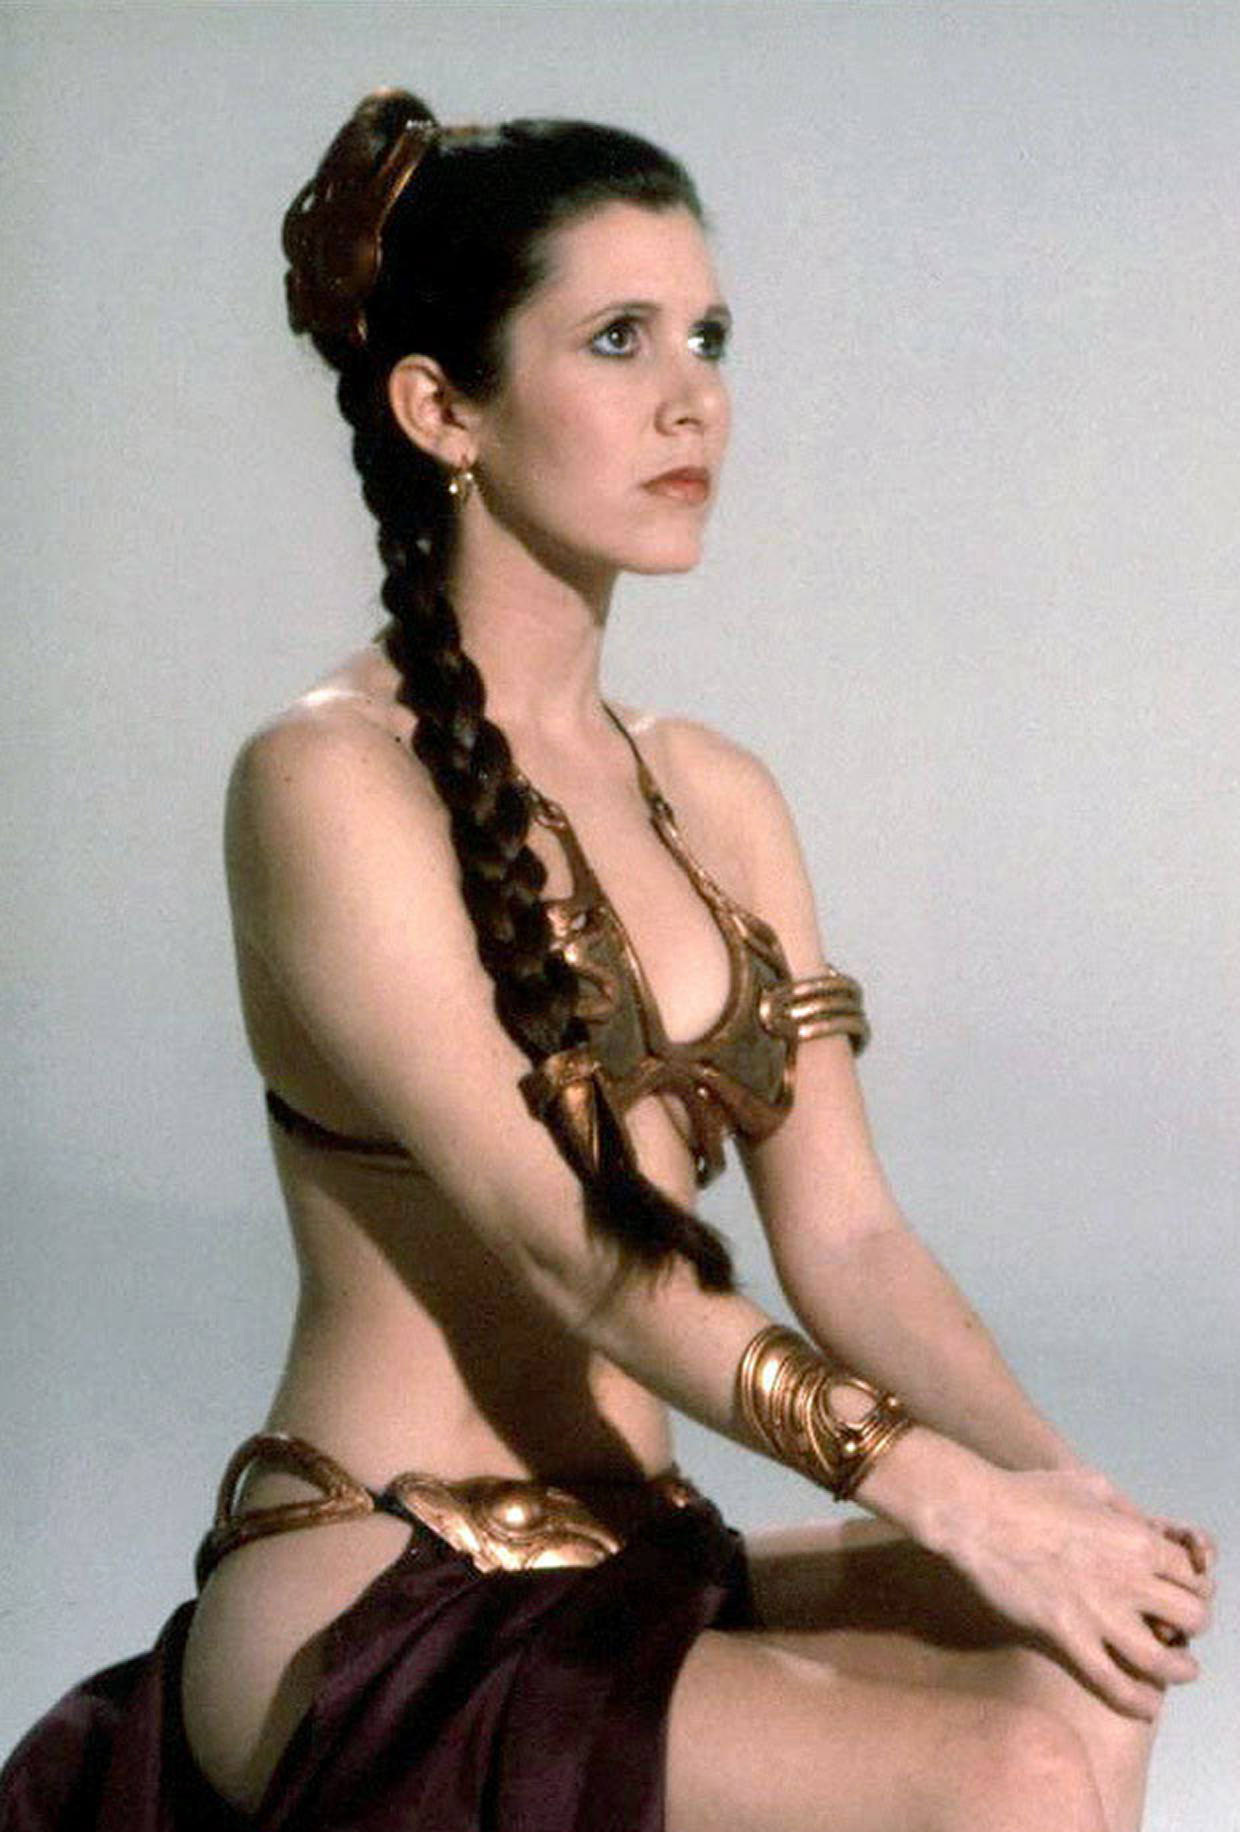 Carrie Fisher played Princess Leia in the early Star Wars films.